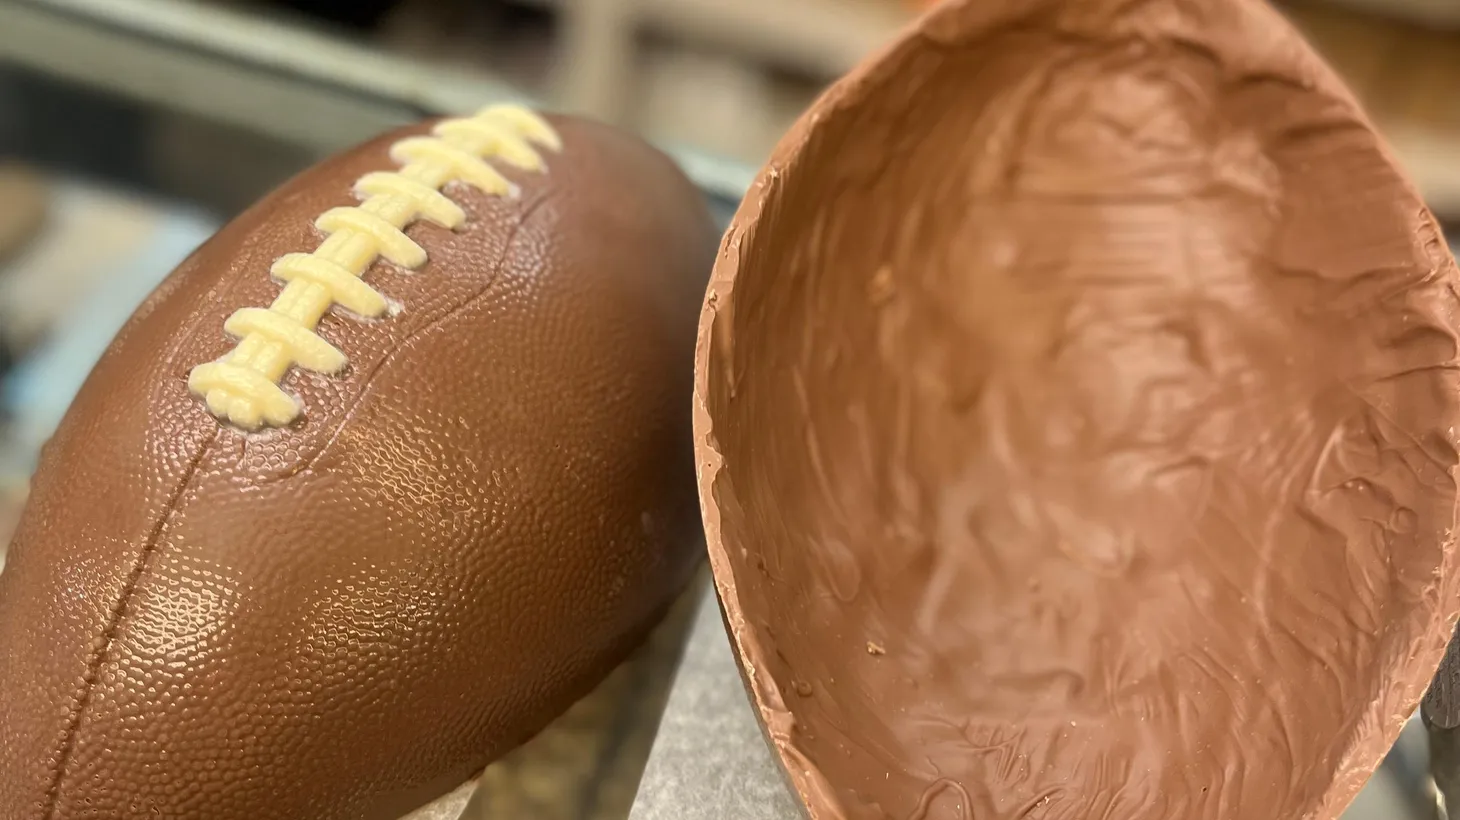 Littlejohn’s Candies in The Original Farmers Market is making an edible chocolate football to fill with chips, pretzels, and your favorite snacks for Sunday’s big game.